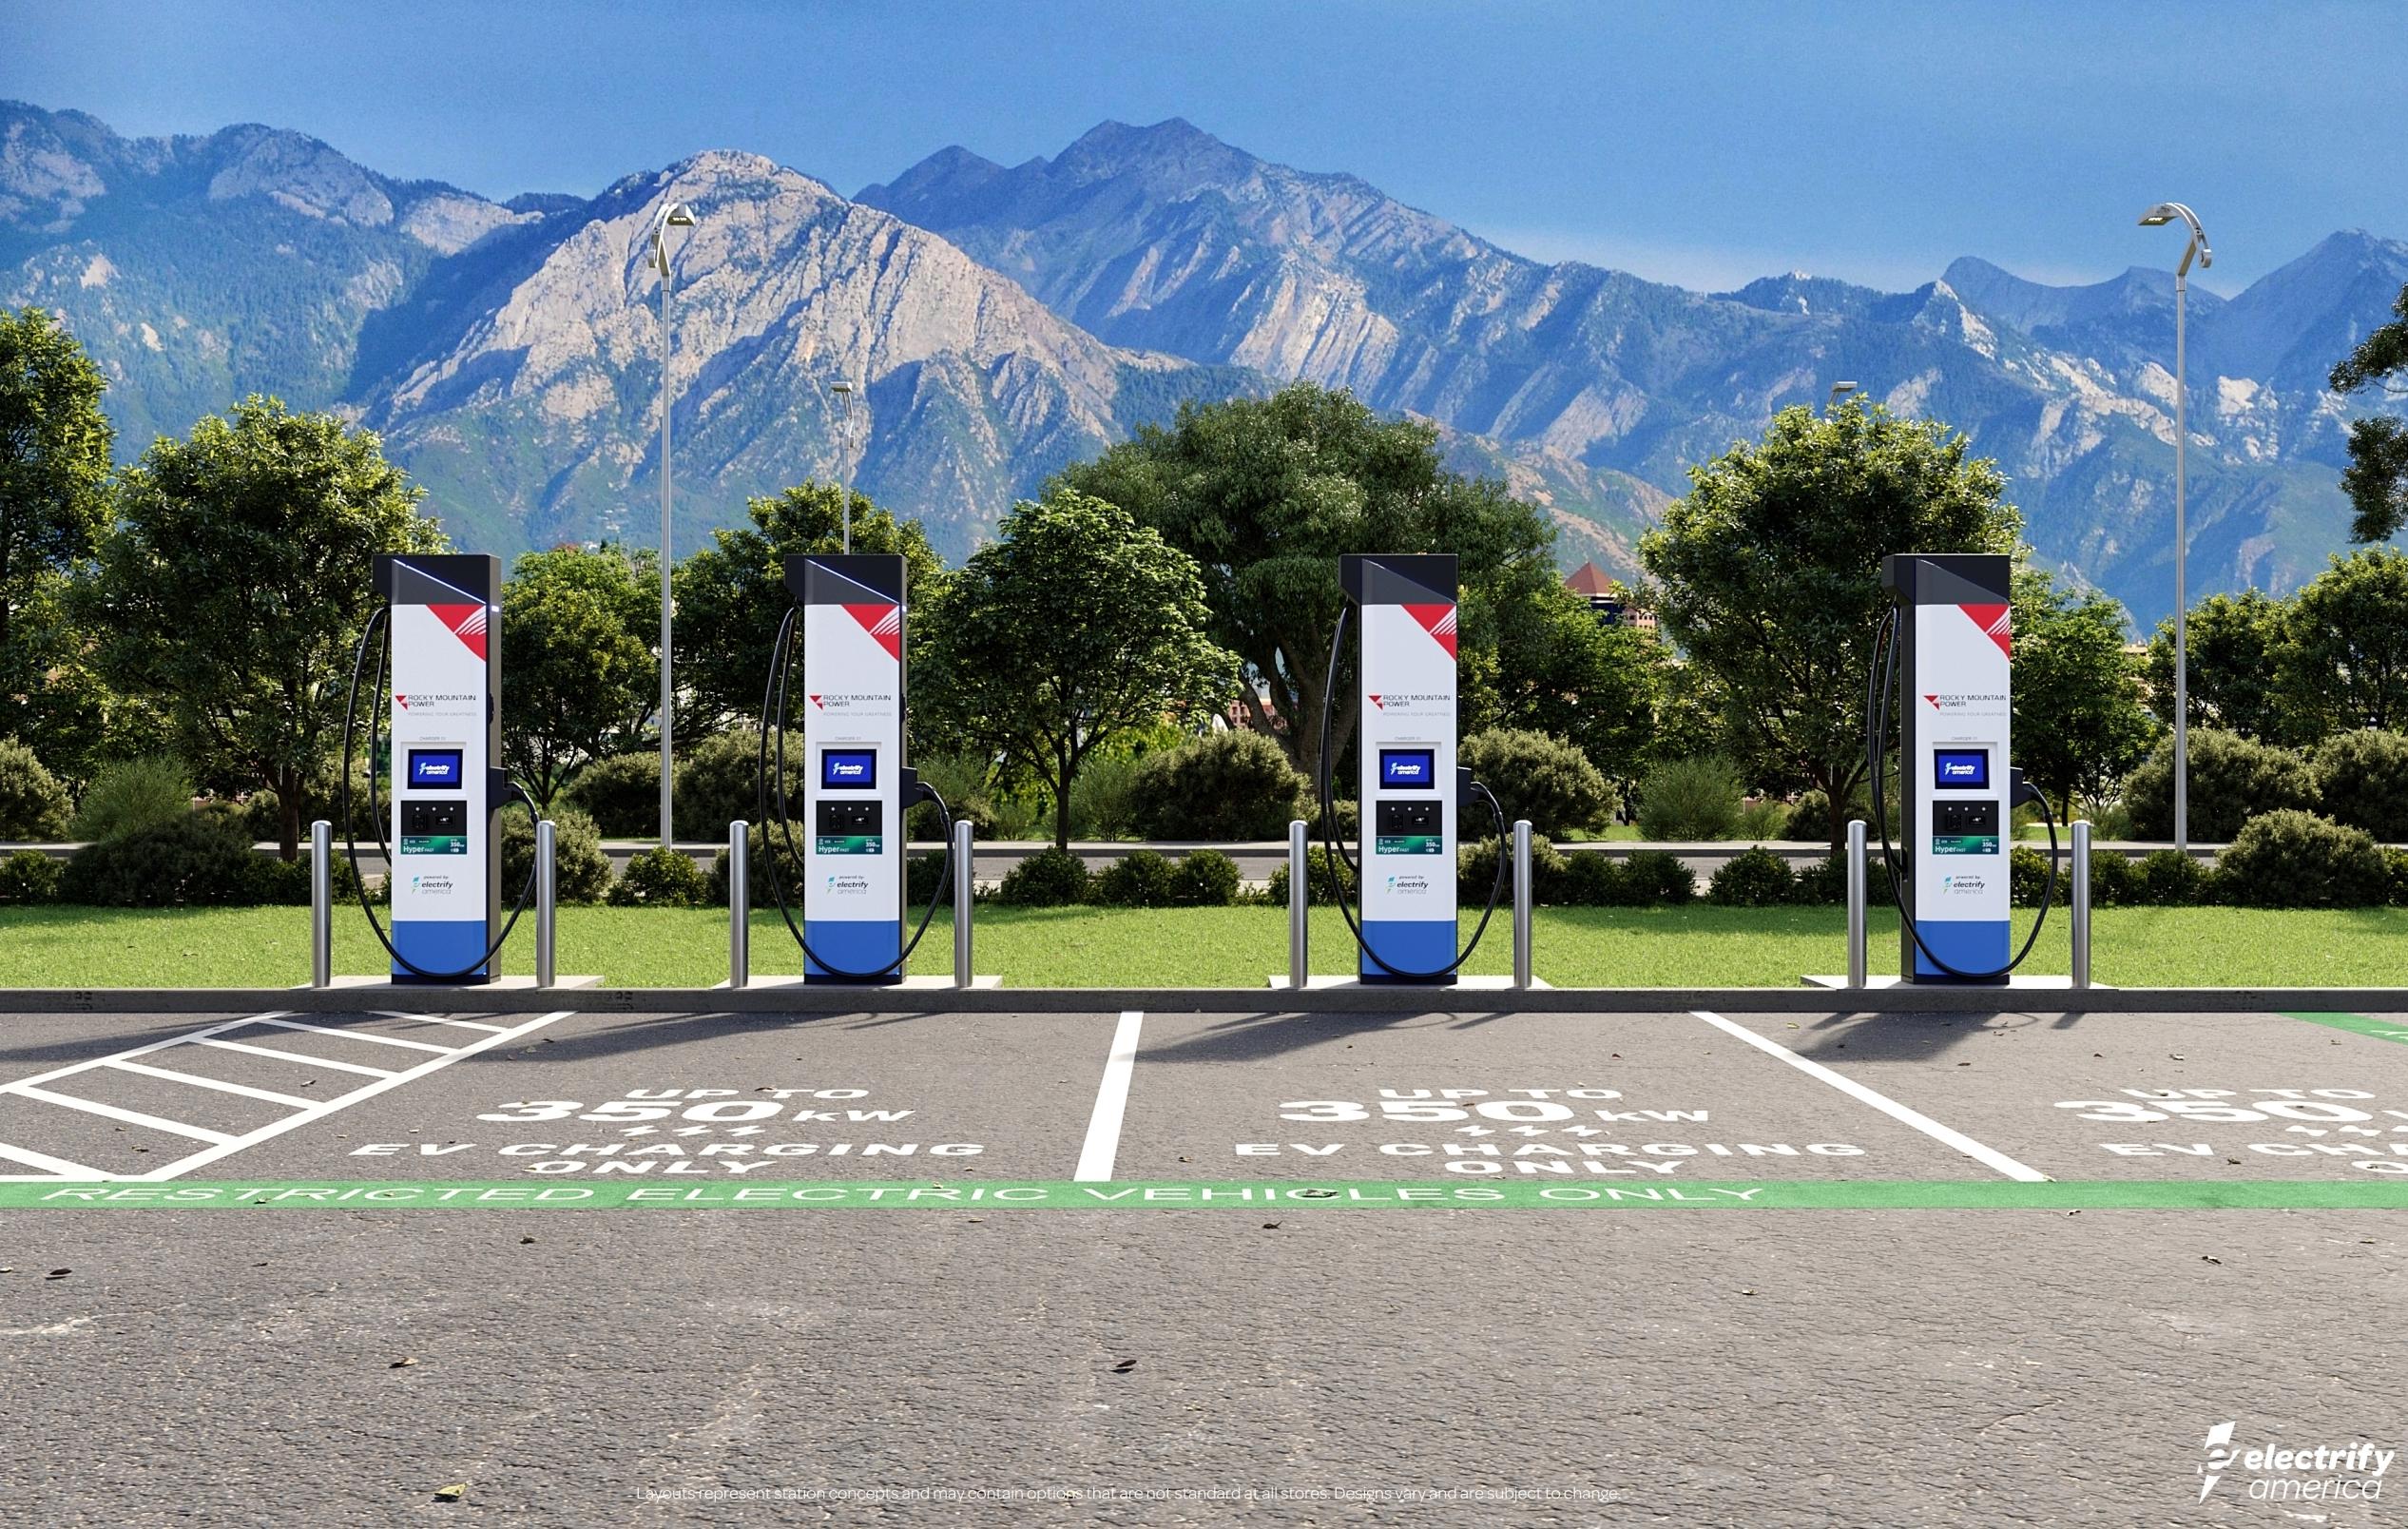 Toyota Compact Cruiser Electrify America is installing EV chargers in Moab! Good news for Jeep Recon owners Medium-1028-ElectrifyCommercialandRockyMountainPowerSupportElectricVehicleEVDriversinUtahwith2